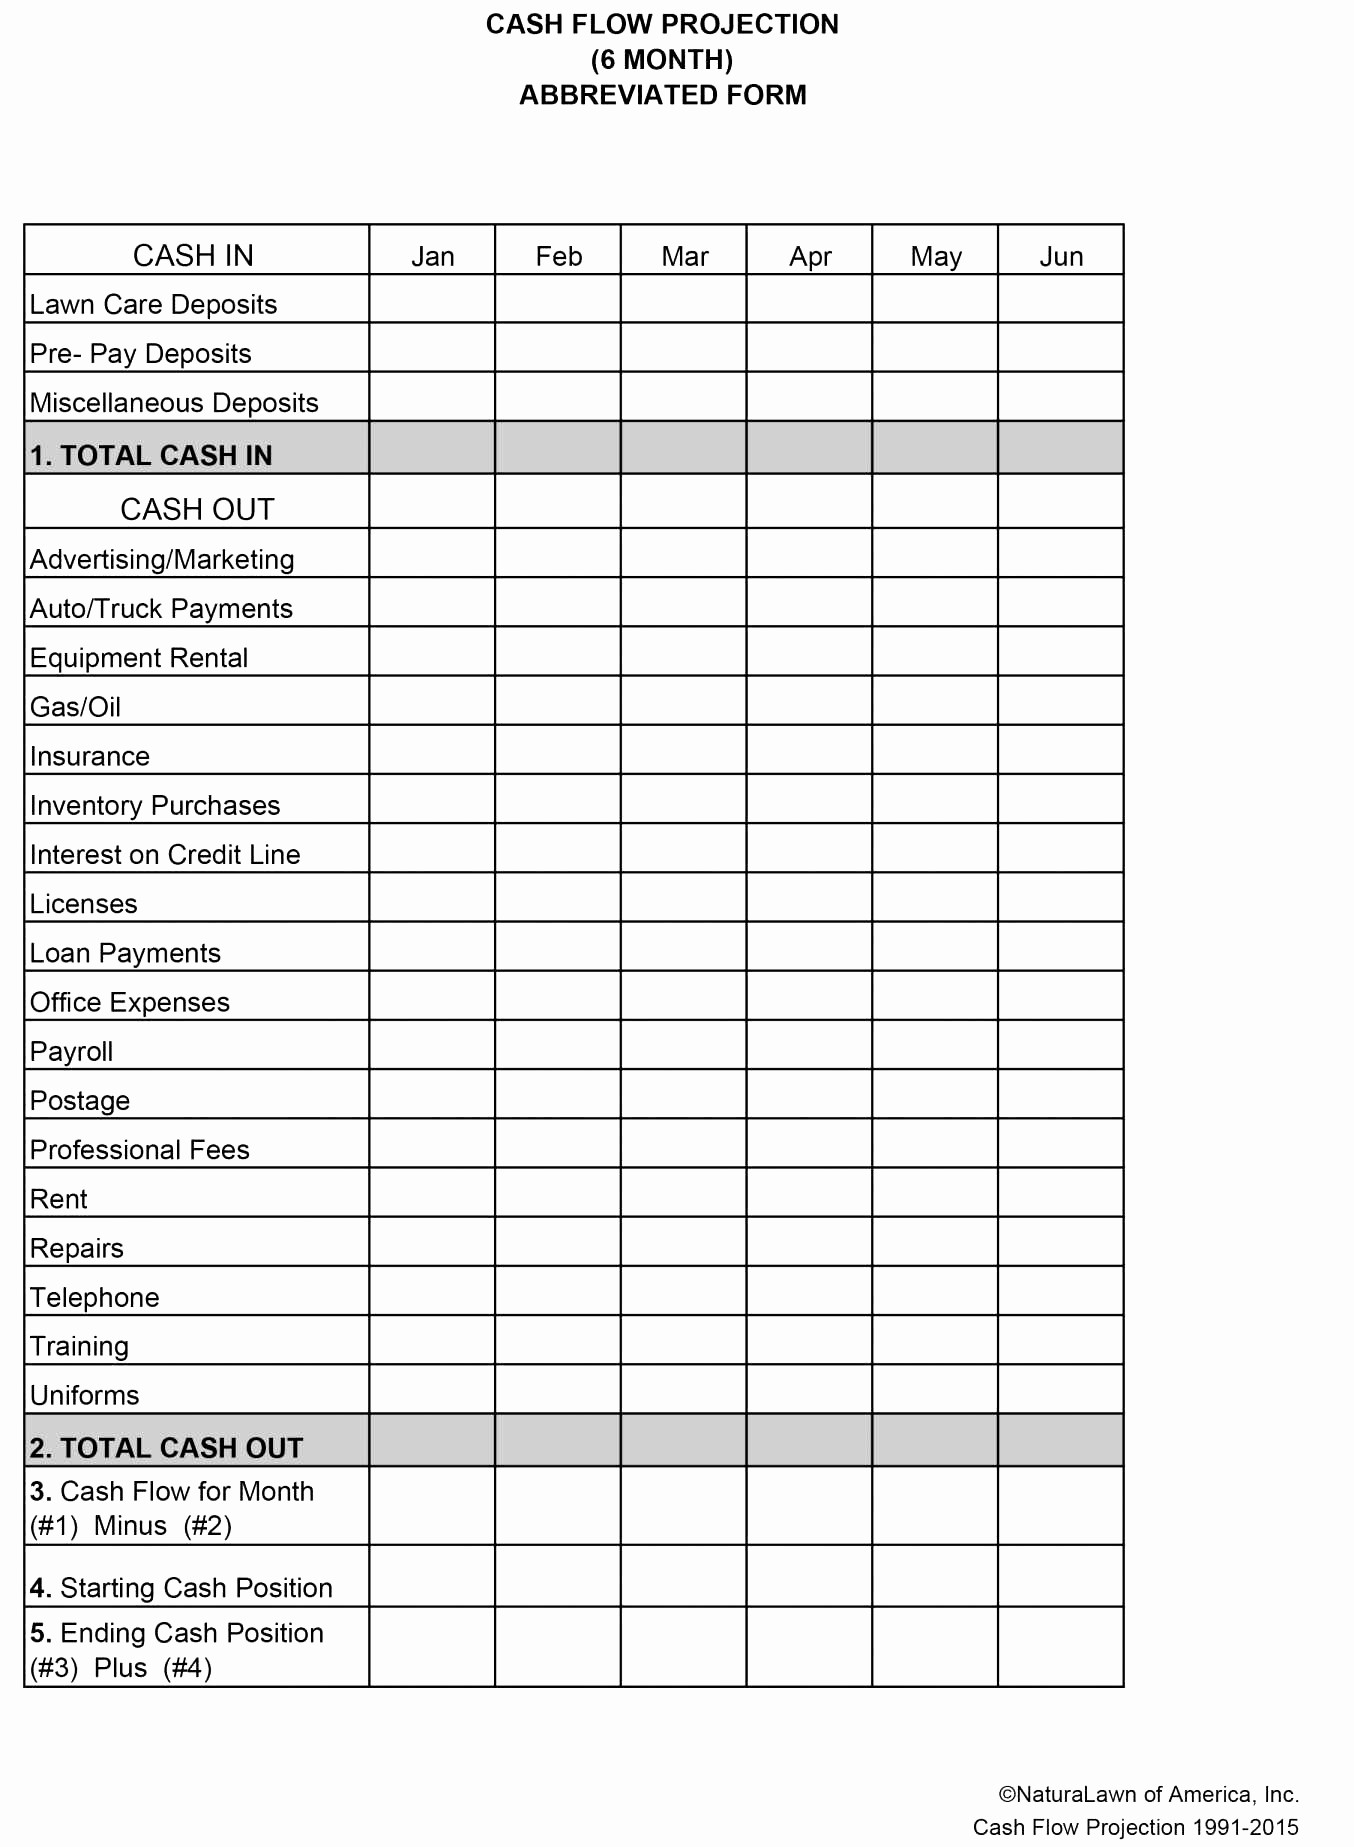 Cattle Inventory Spreadsheet Template with regard to Cattle Inventory Spreadsheet ...1354 x 1847